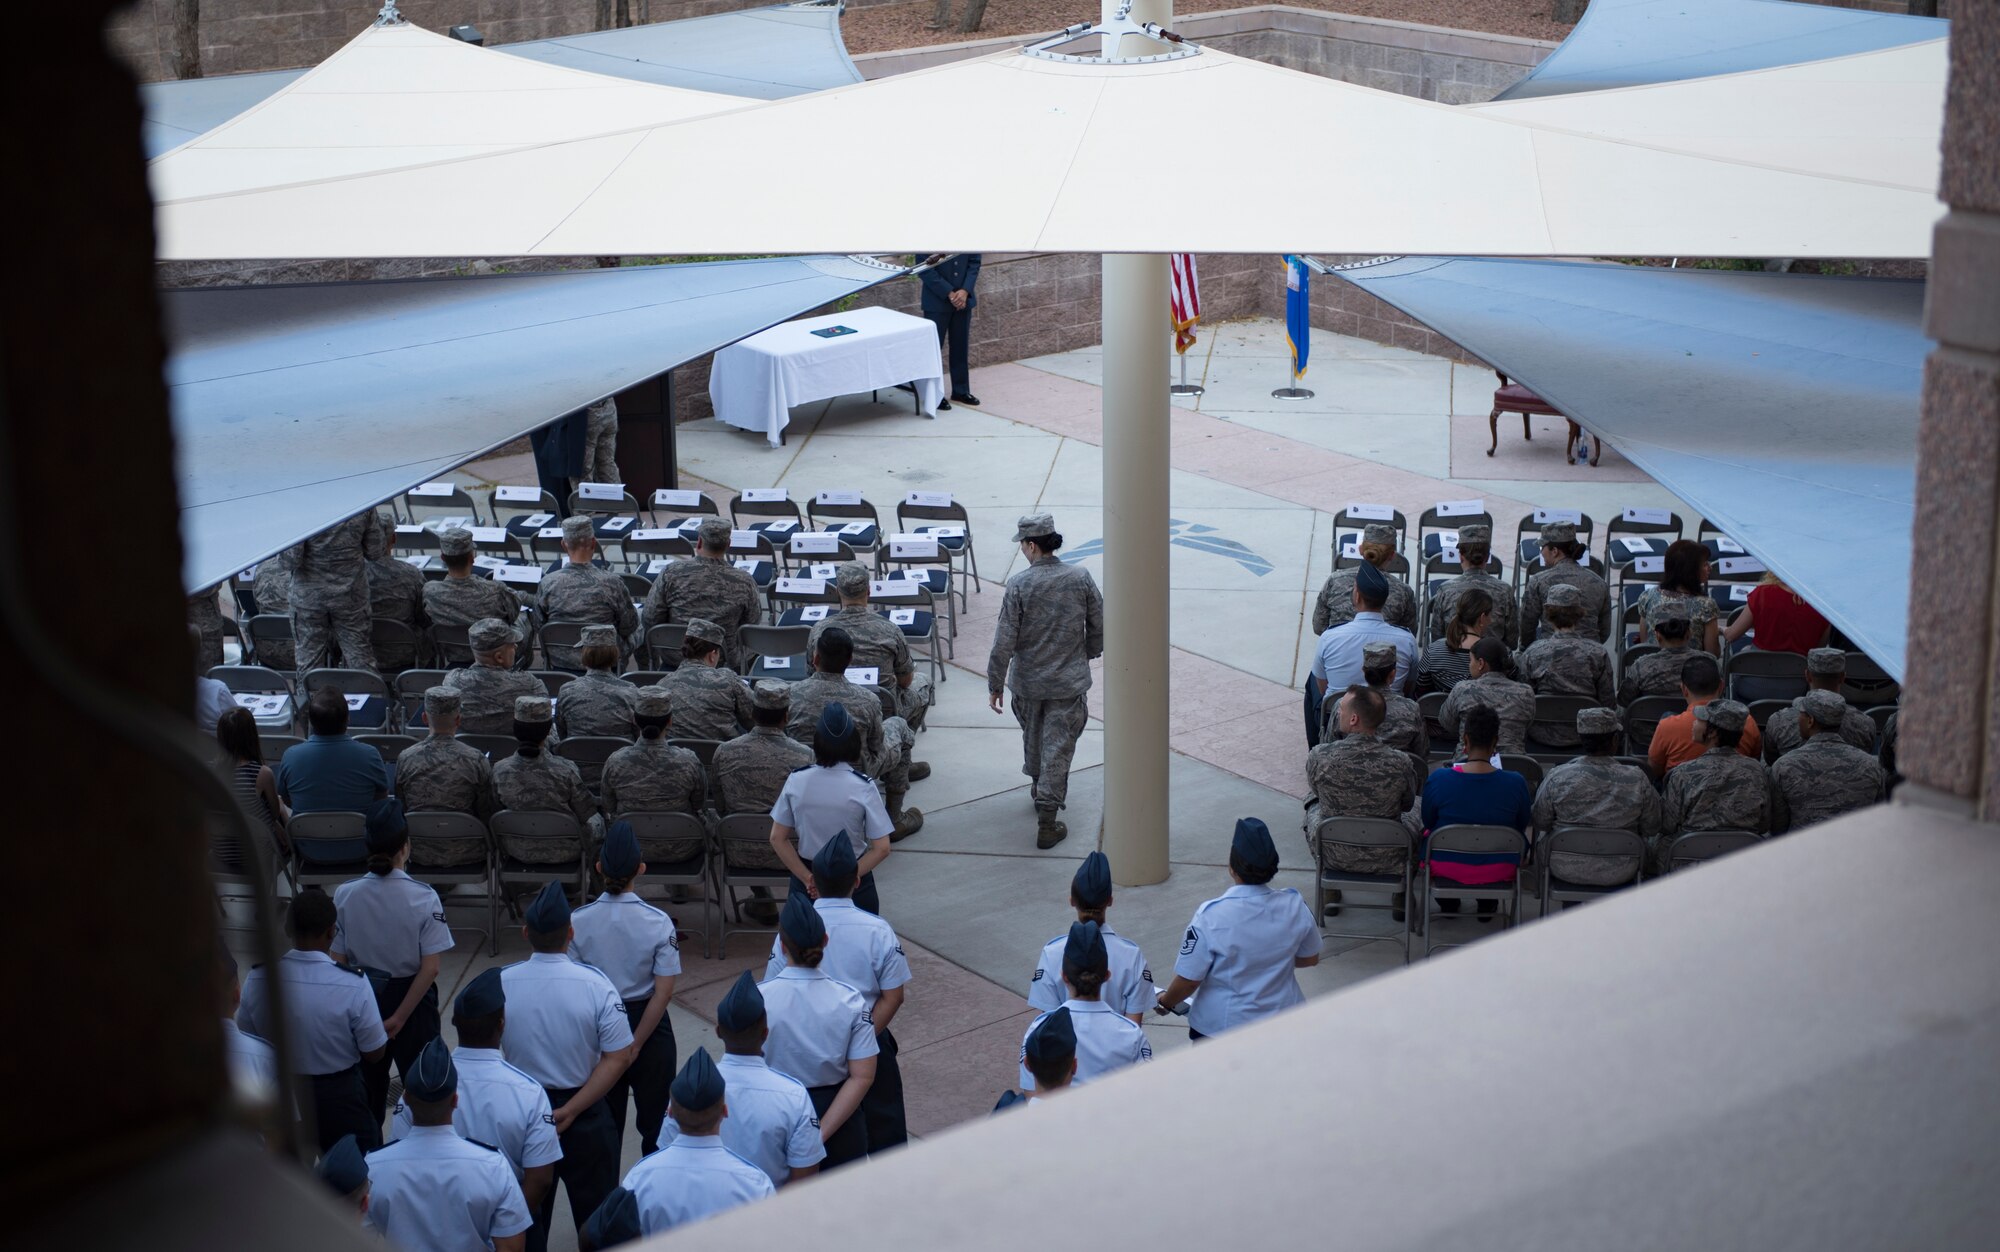 Airmen gather for the 99th Medical Group change of command ceremony at Nellis Air Force Base, Nevada, June 29, 2018. The 99th MDG provides medical care to Department of Defense beneficiaries to ensure maximum wartime readiness and combat capability. (U.S. Air Force photo by Airman 1st Class Andrew D. Sarver)